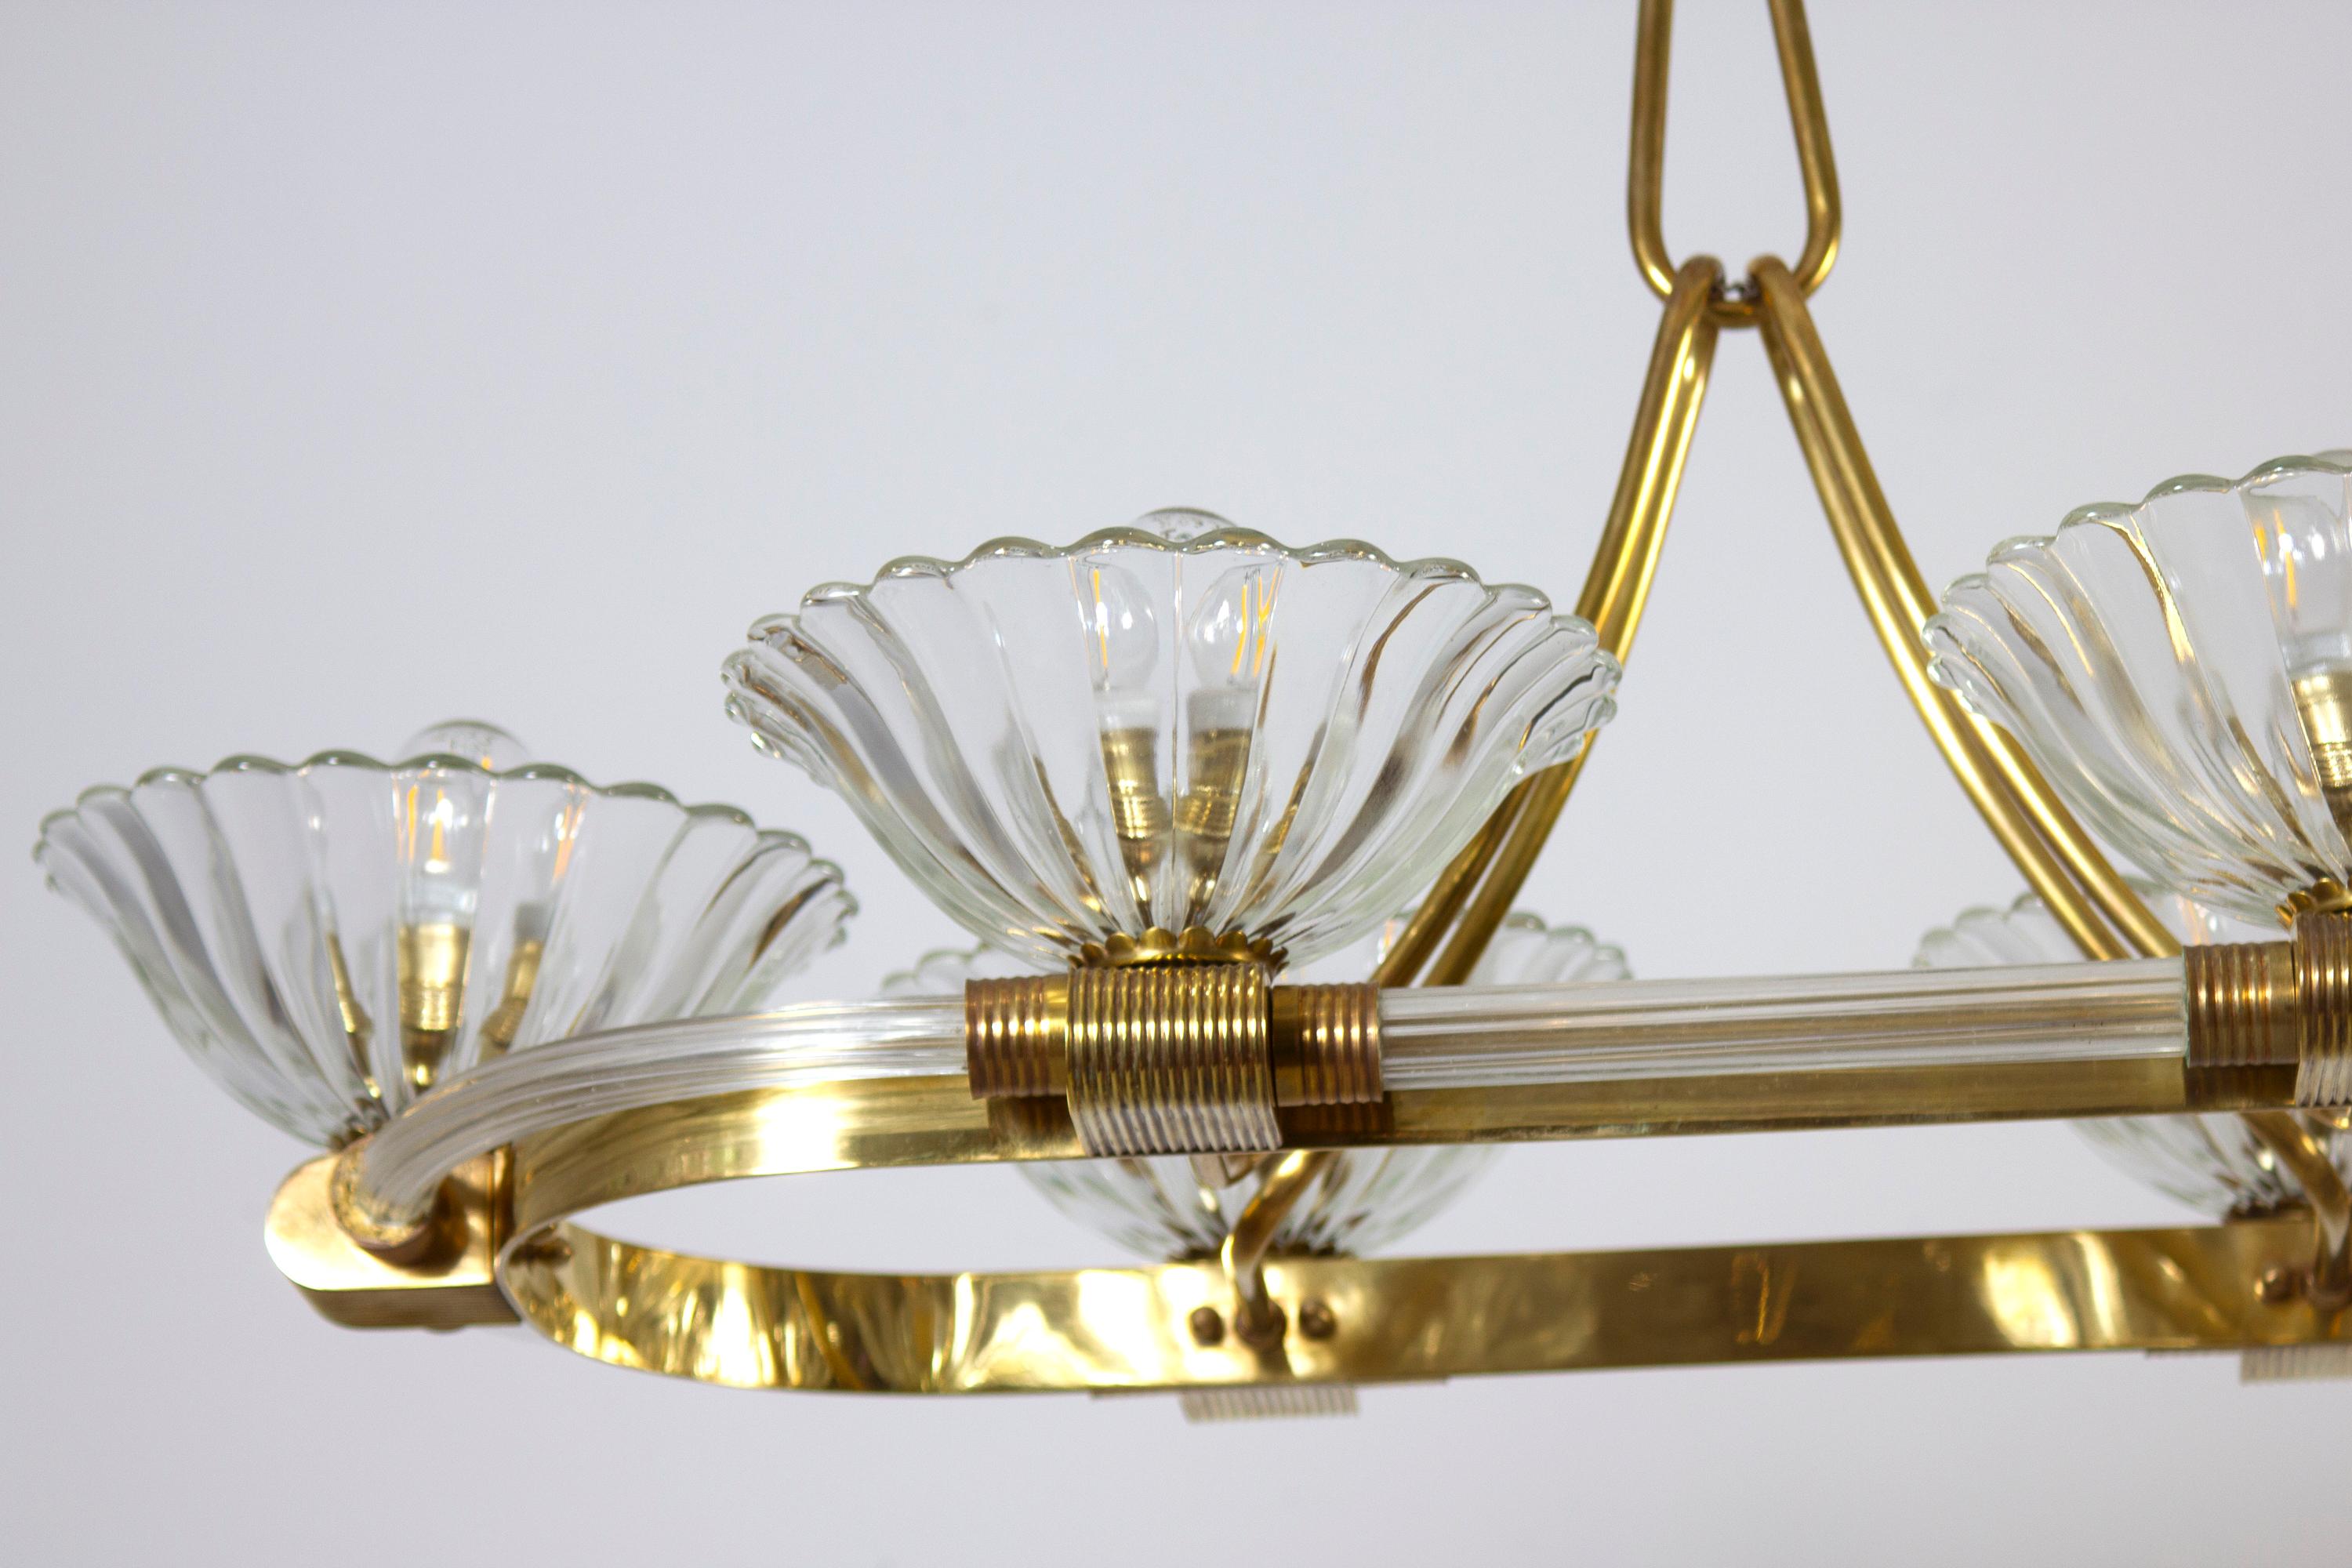  Art Deco Oval Shape Brass and Murano Glass Chandelier by Ercole Barovier 1940 For Sale 1